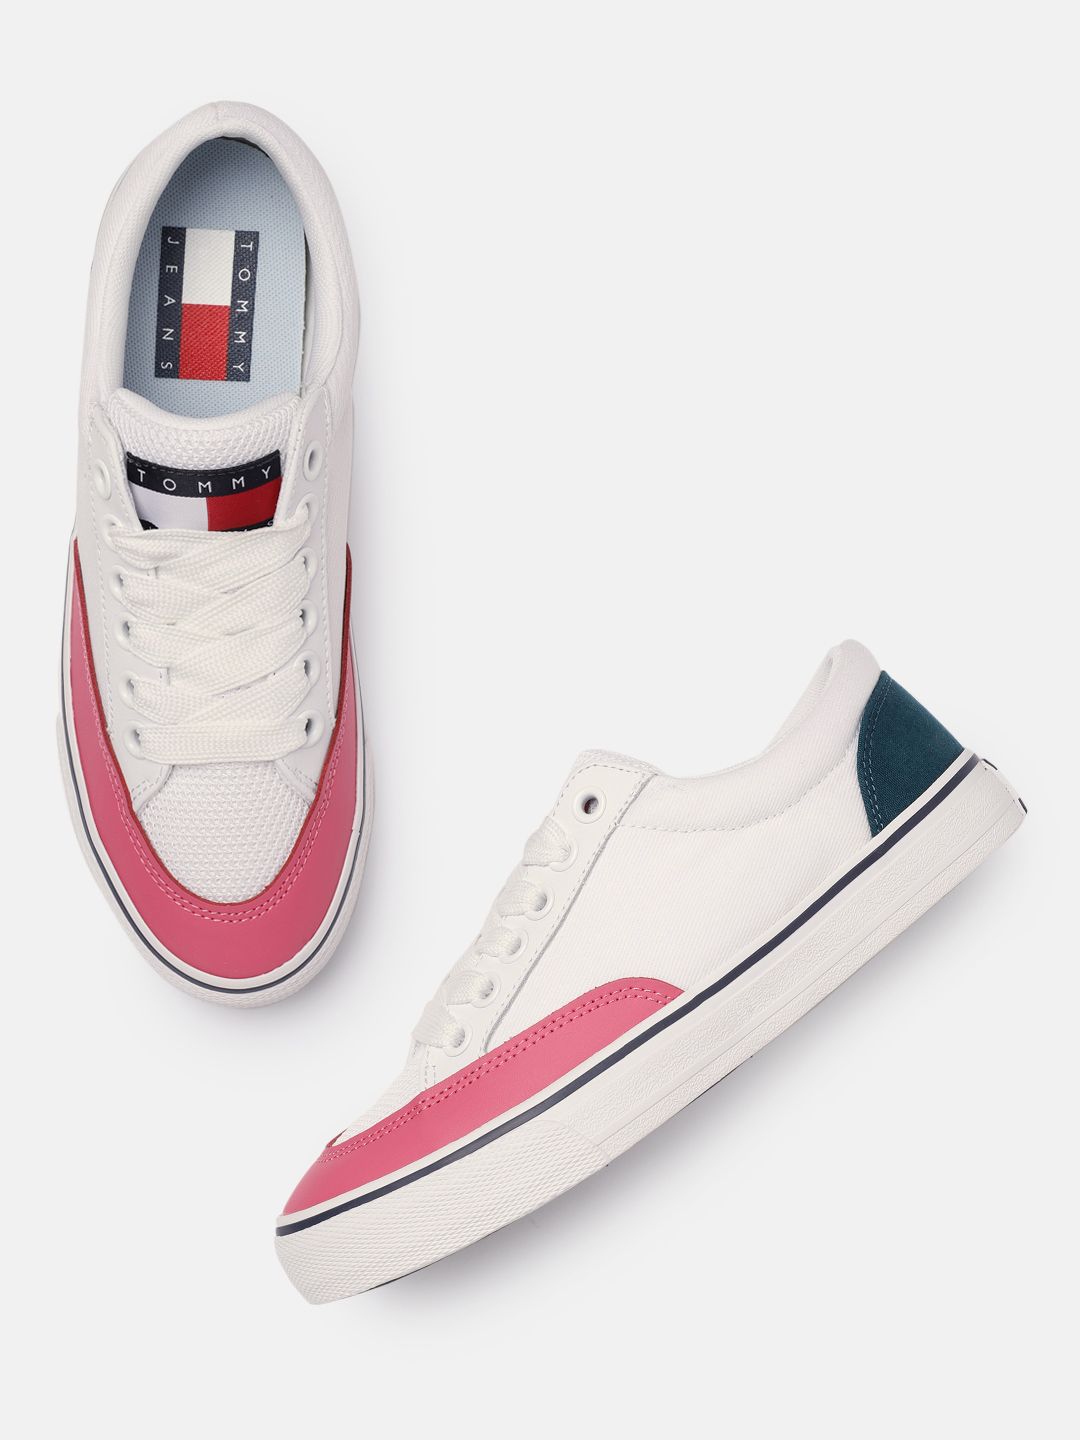 Tommy Hilfiger Women Solid White & Pink Sneakers Price in India